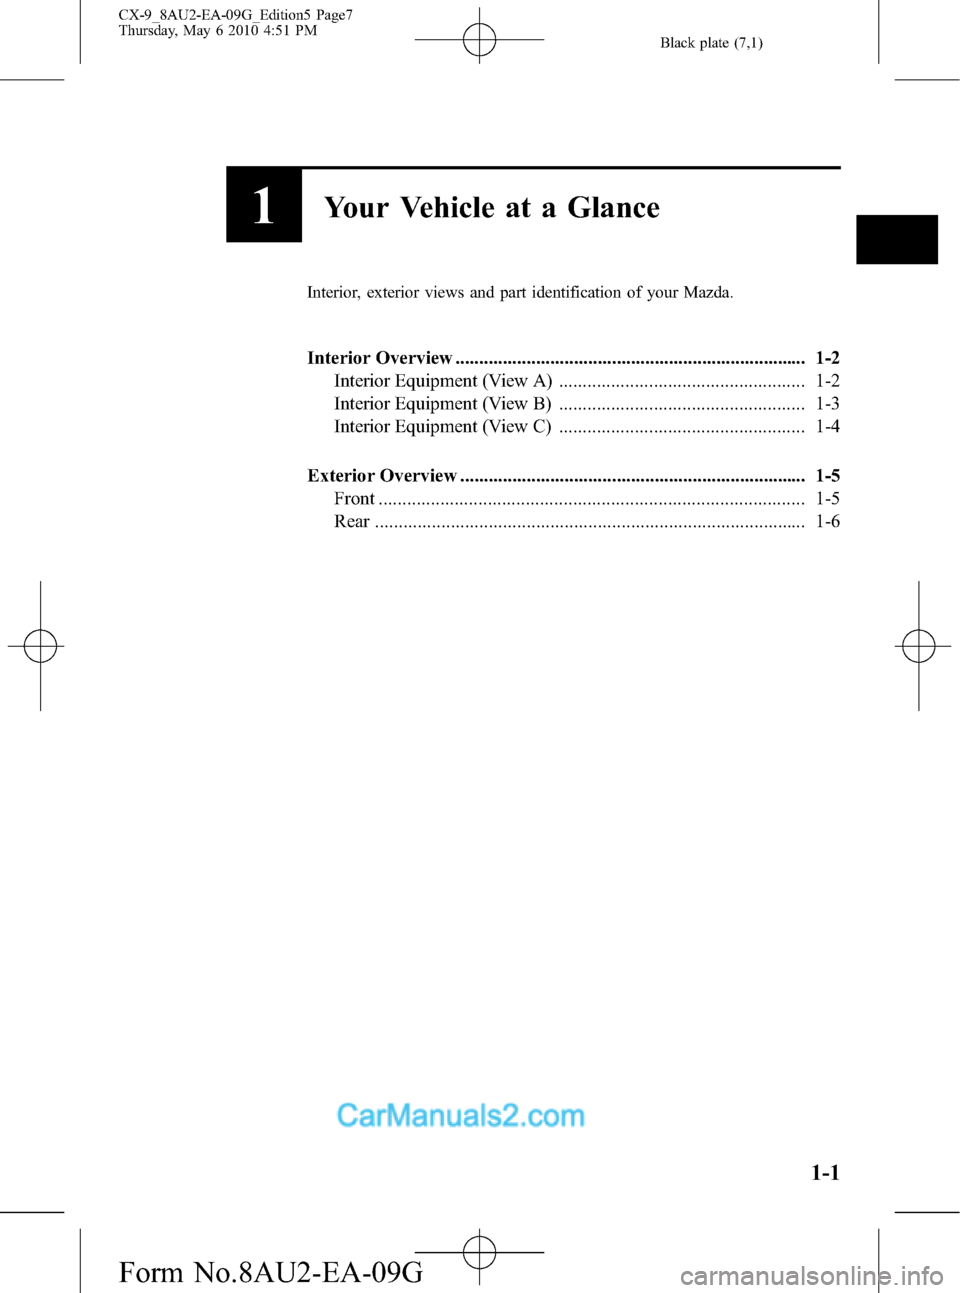 MAZDA MODEL CX-9 2010  Owners Manual (in English) Black plate (7,1)
1Your Vehicle at a Glance
Interior, exterior views and part identification of your Mazda.
Interior Overview ..........................................................................